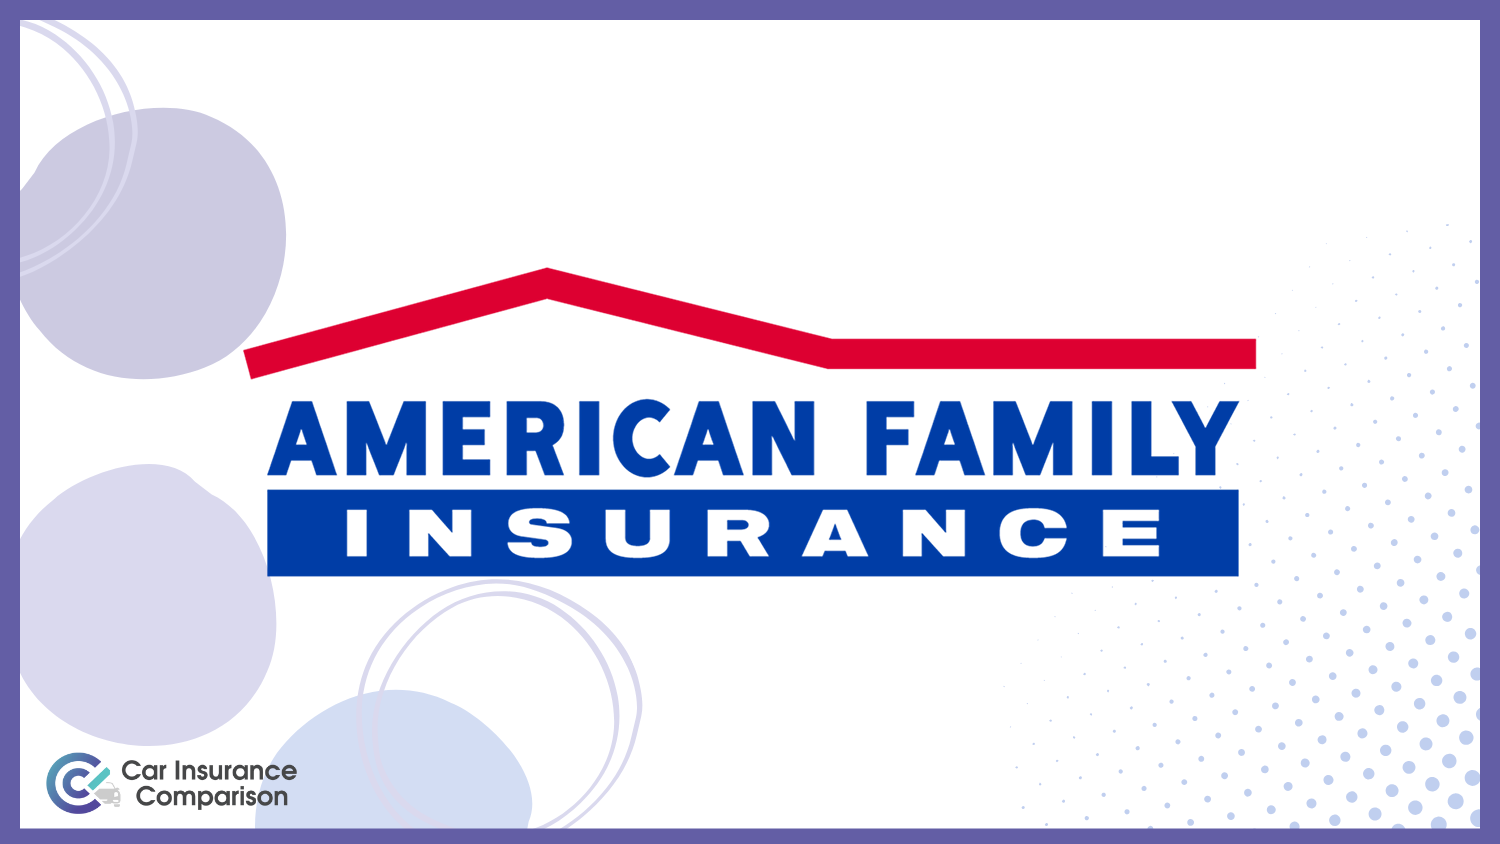 American Family: Best Car Insurance for Undocumented Immigrants